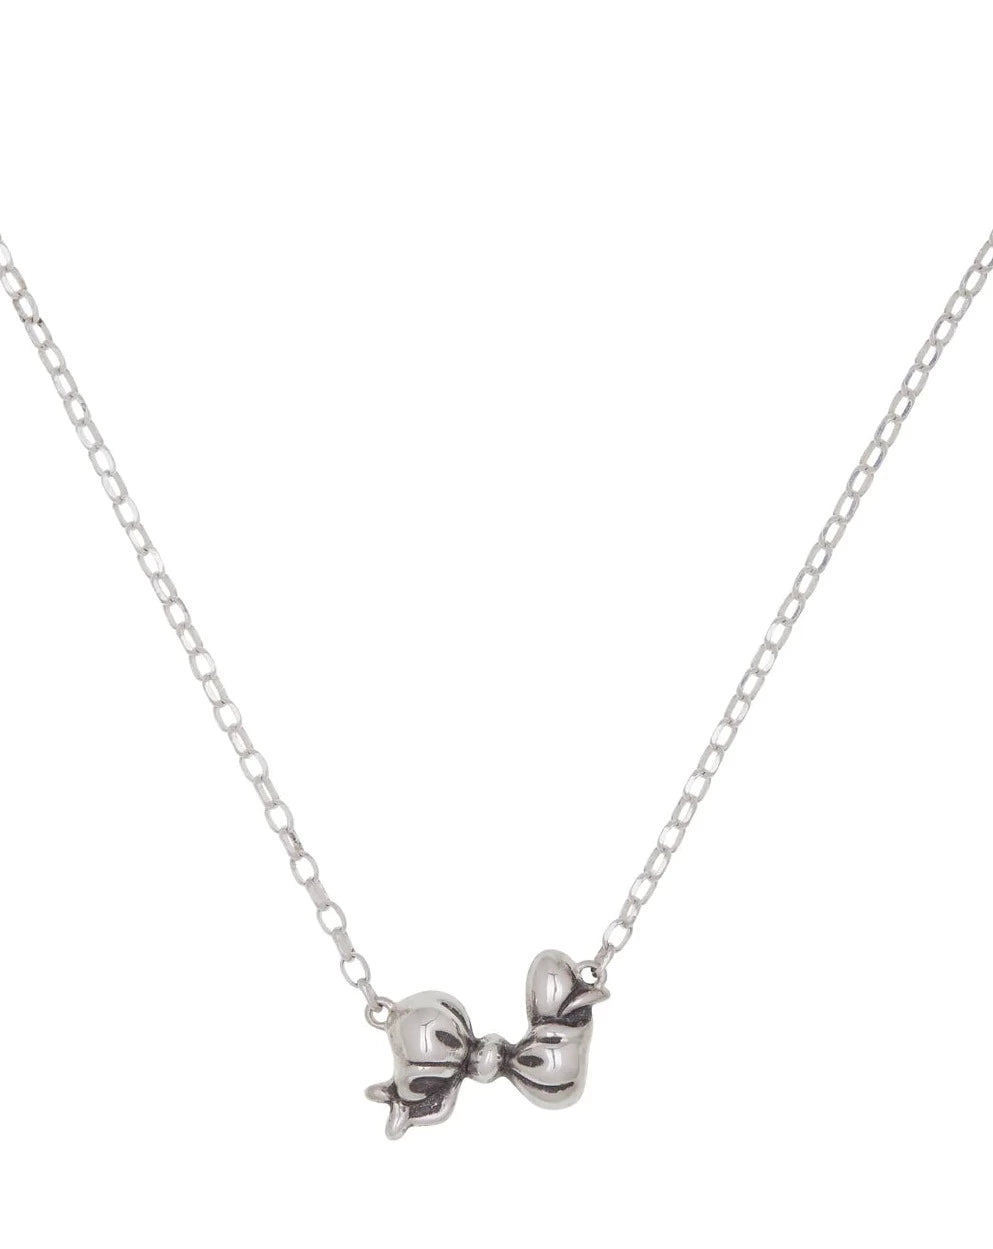 Sterling silver mini bow pendant on a rolo chain with spring clasp.